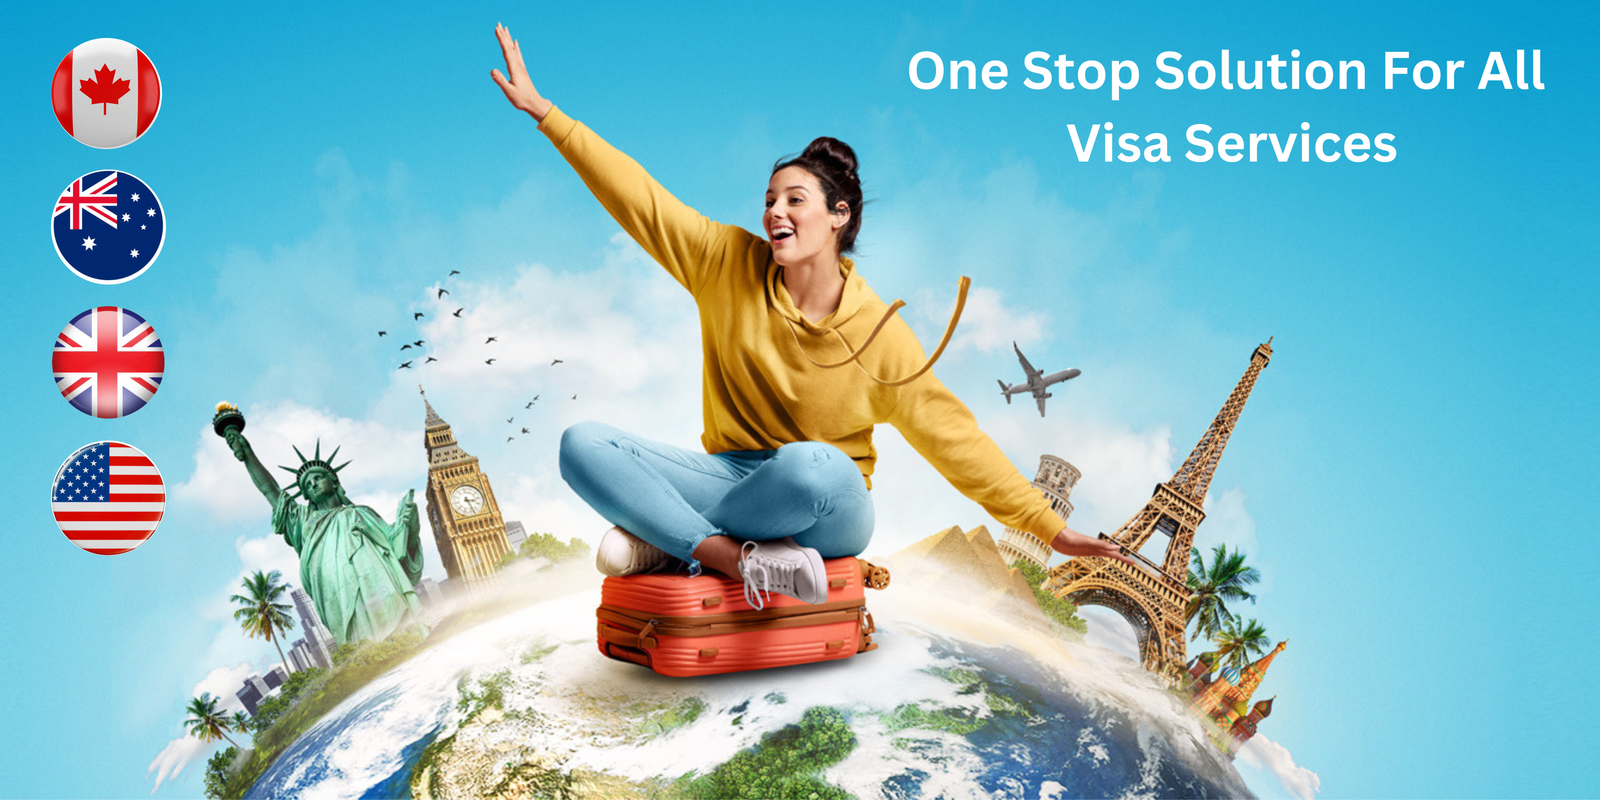 One Stop Solution For All Visa Services